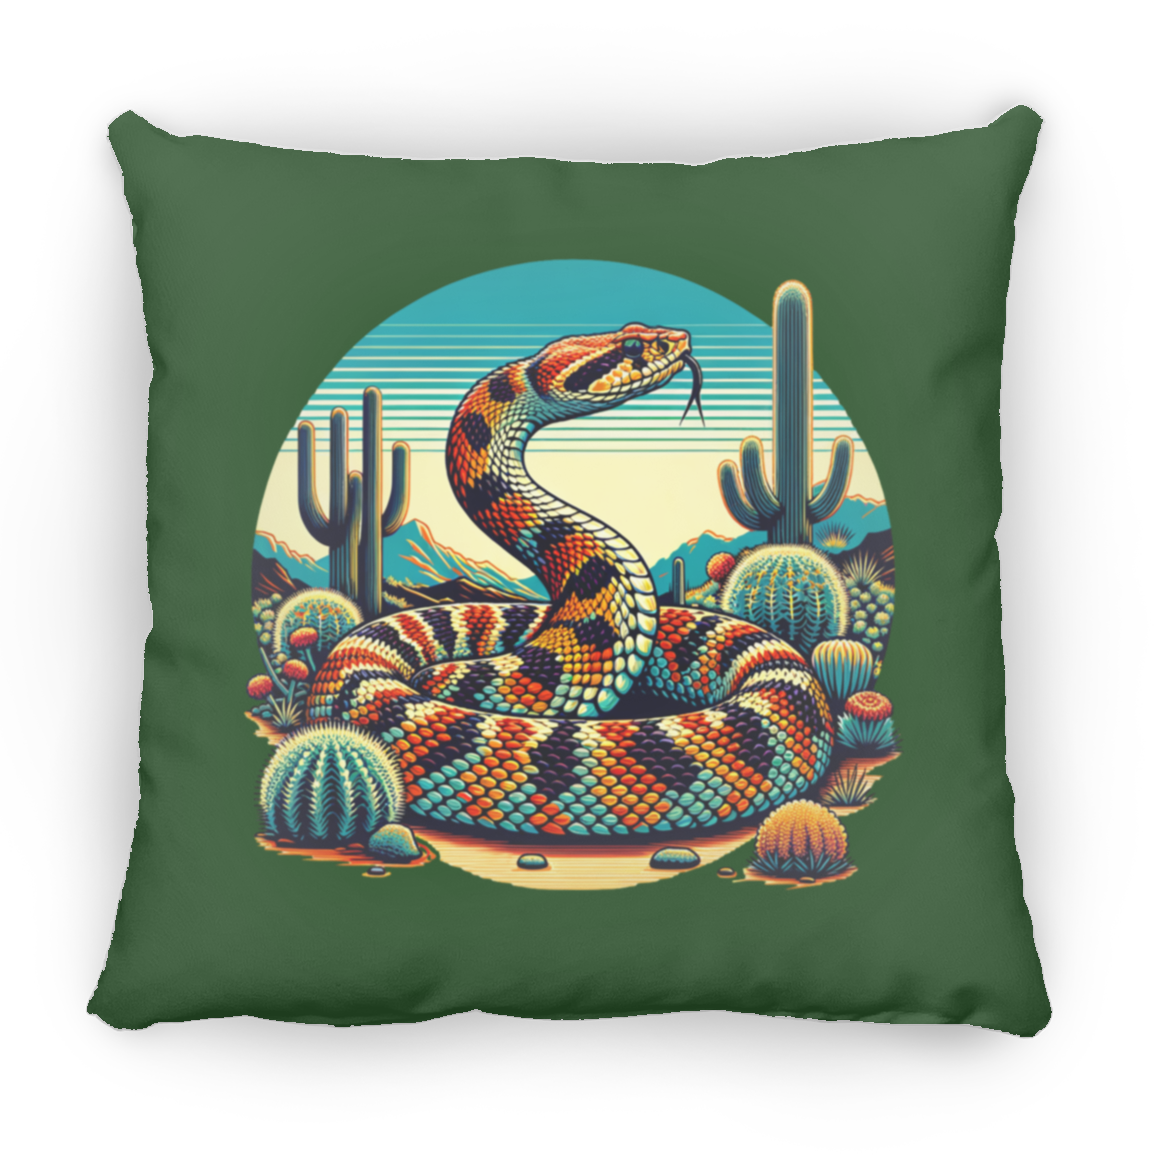 Rattlesnake and Cactus Graphic - Pillows